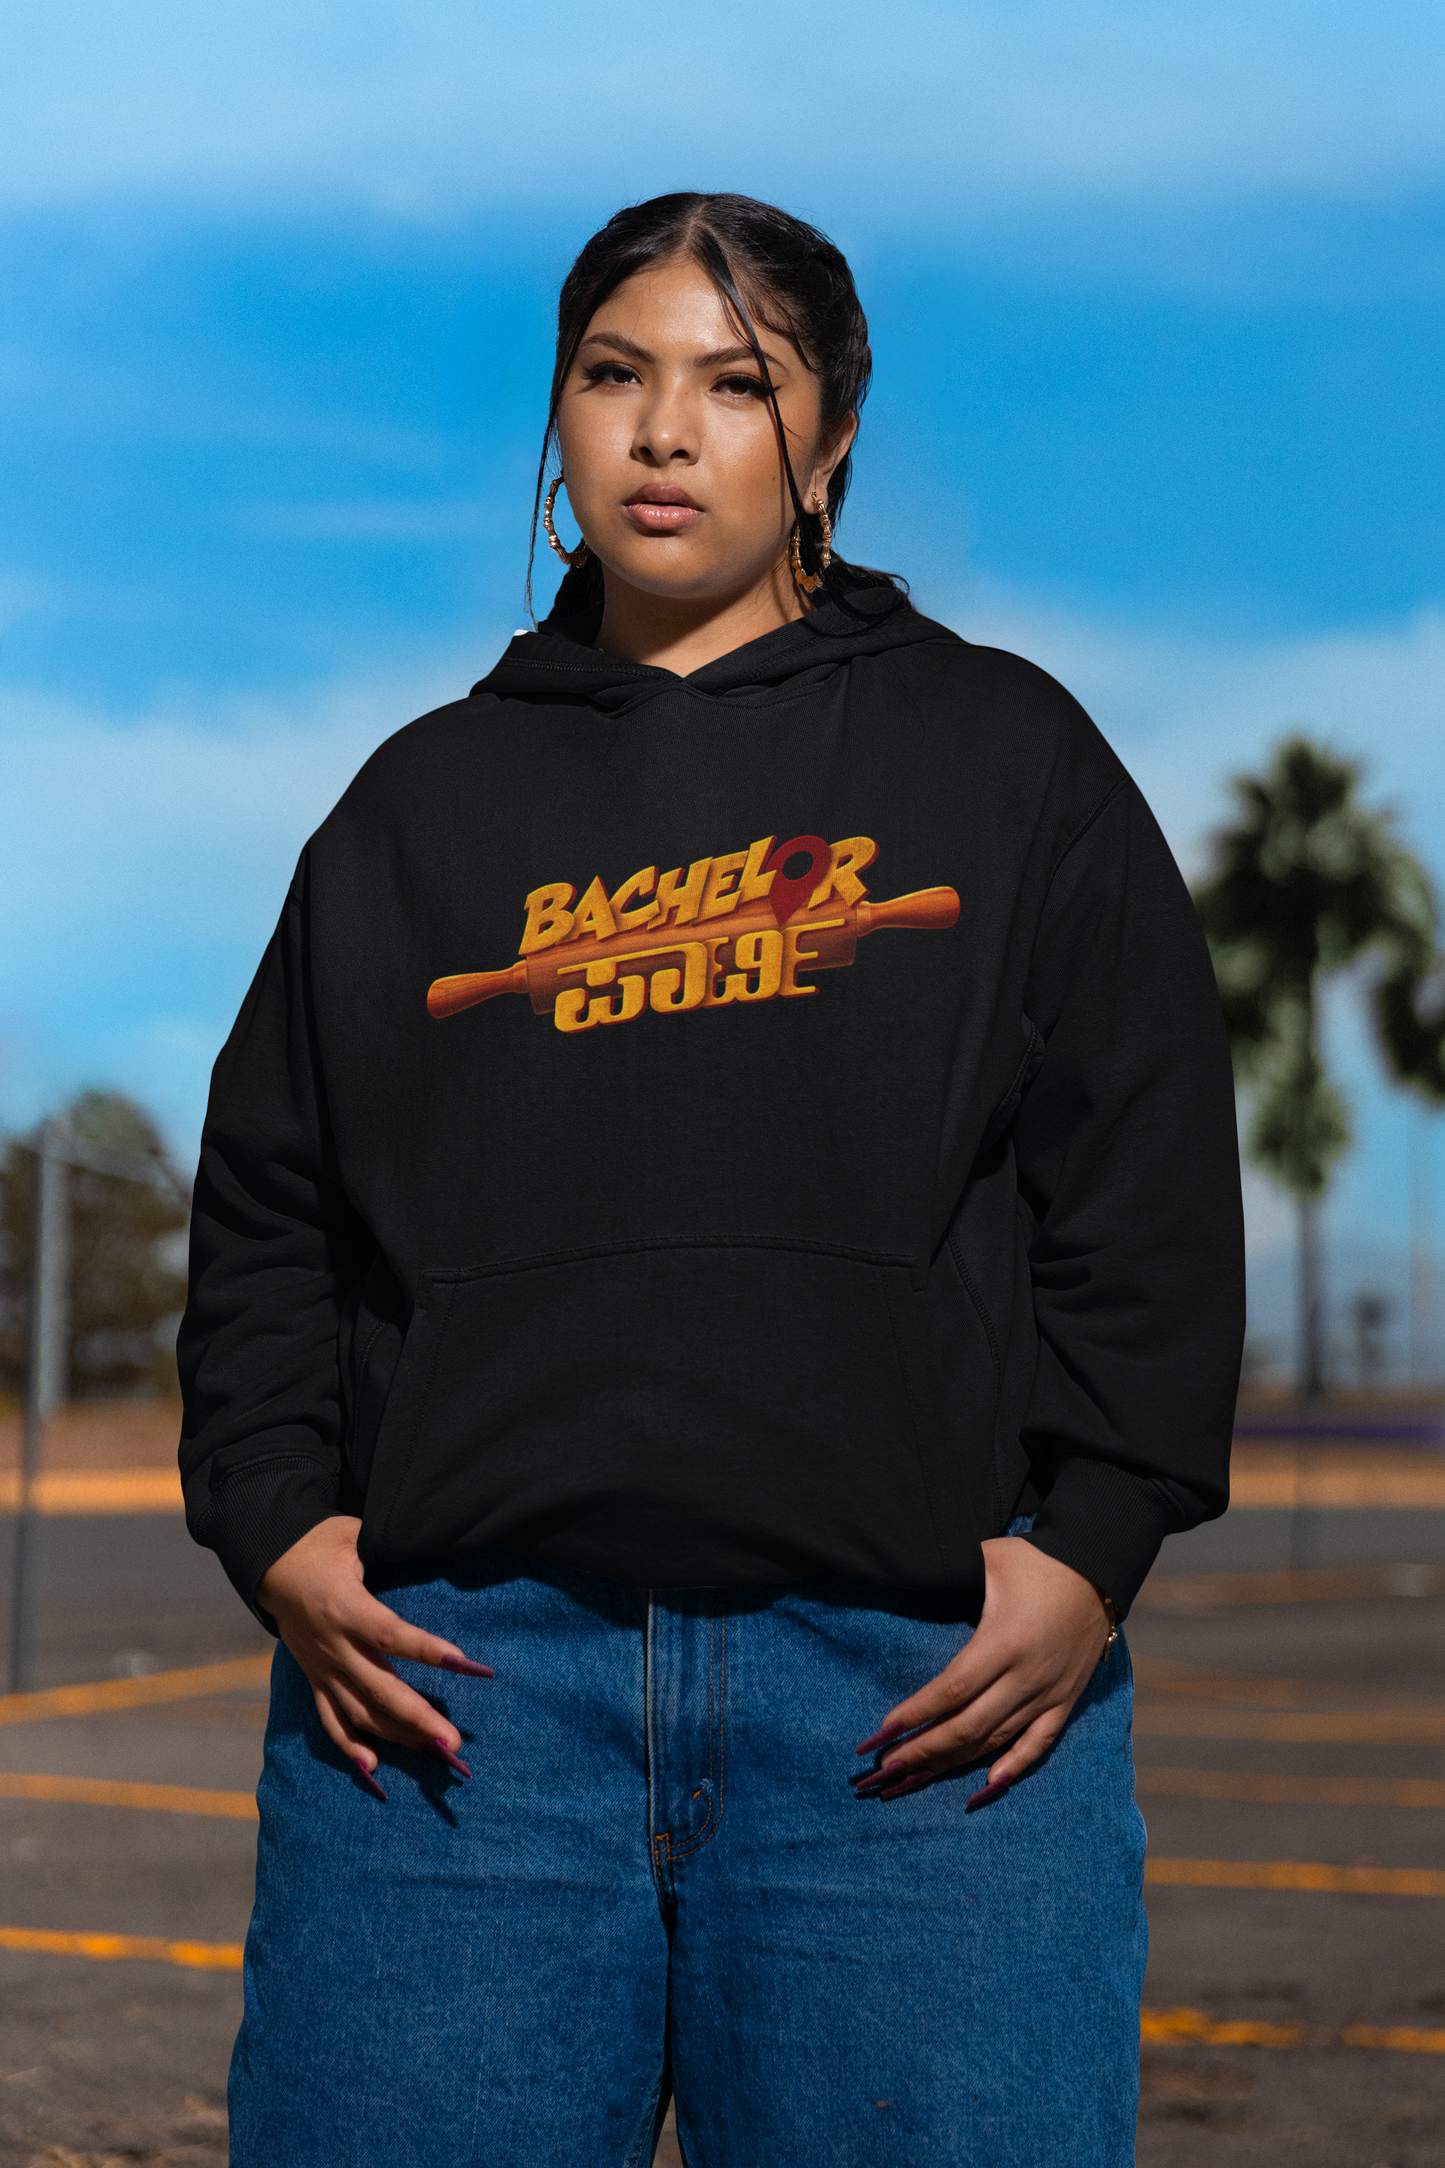 Bachelor Party Women's Oversized Hoodie